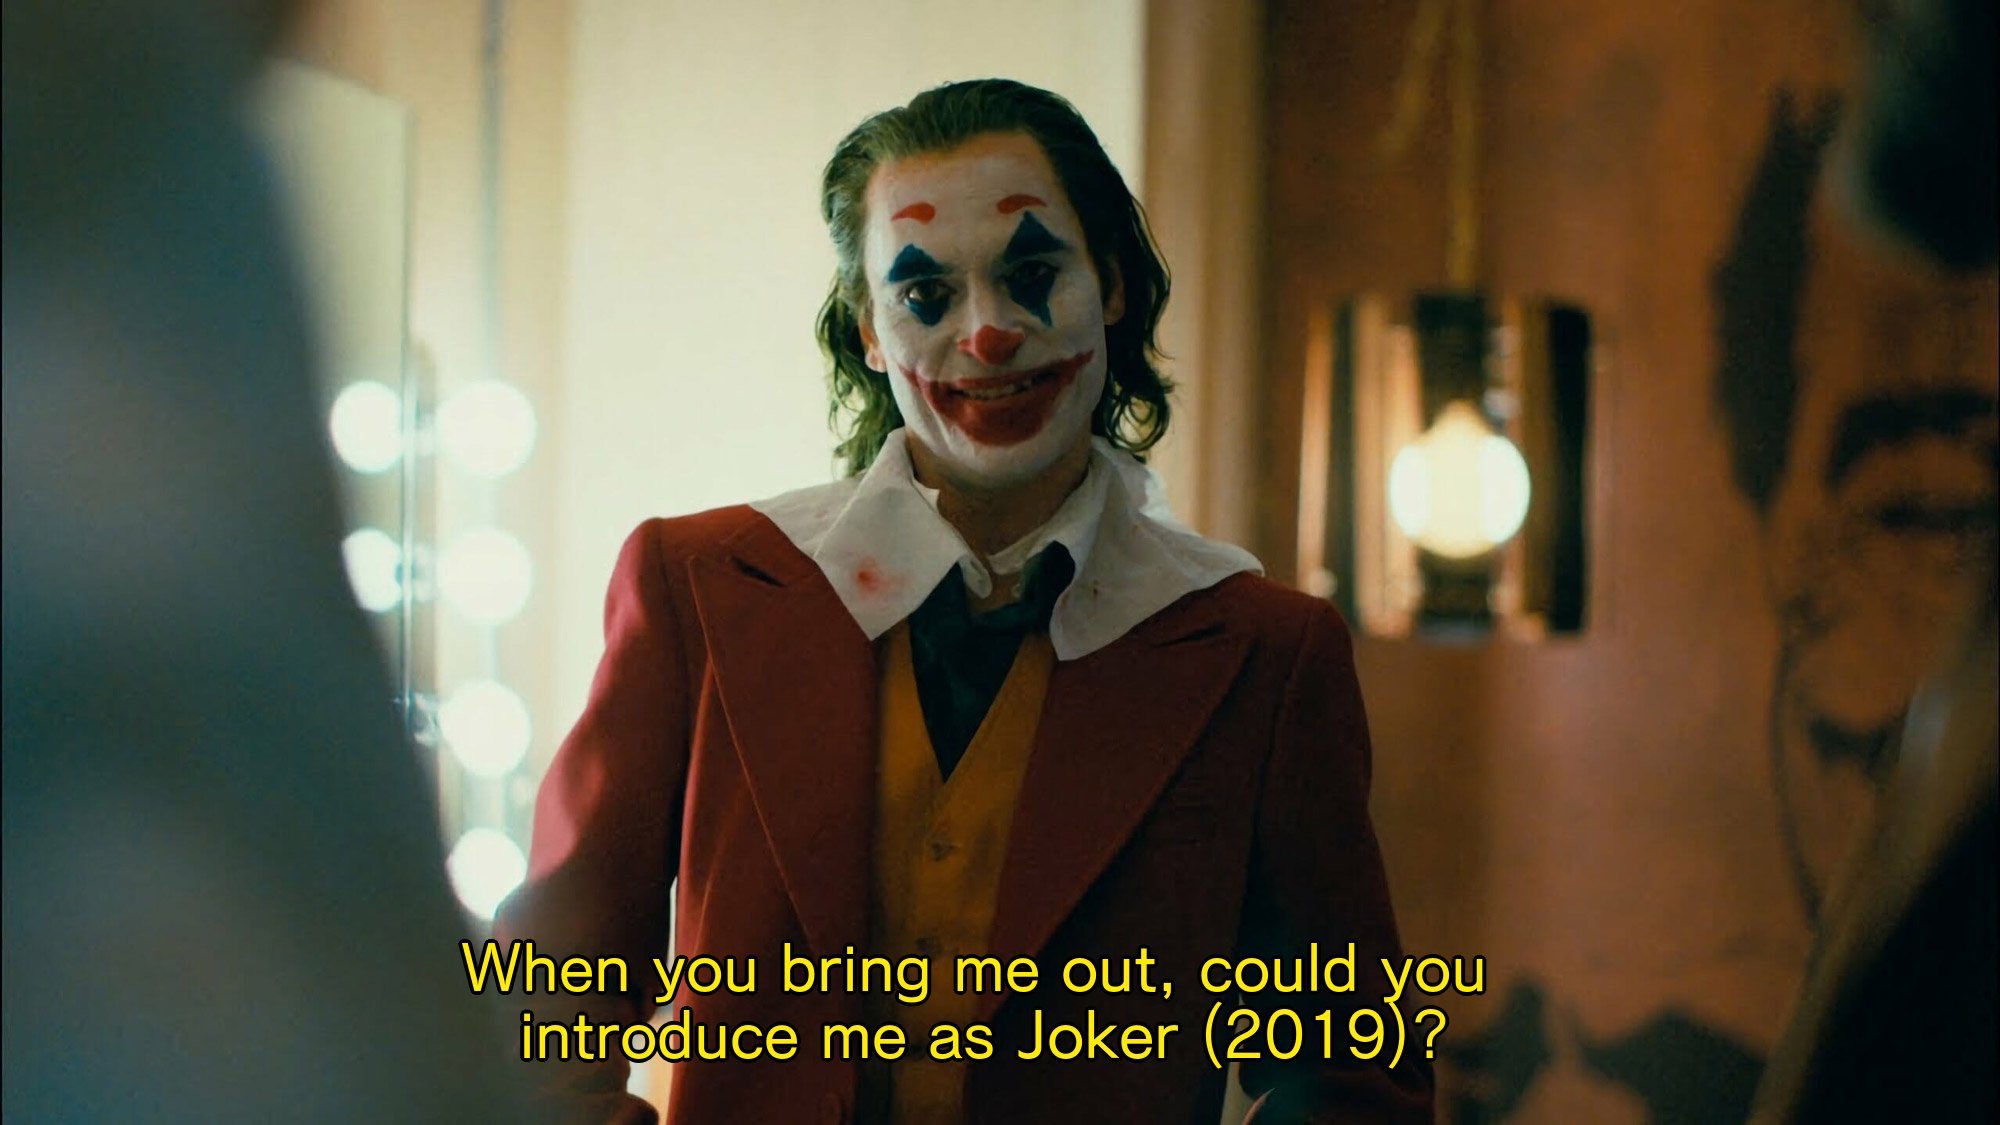 He Didn't Say That -Movie Titles in Movie Lines- joaquin phoenix joker trailer - When you bring me out, could you introduce me as Joker 2019?